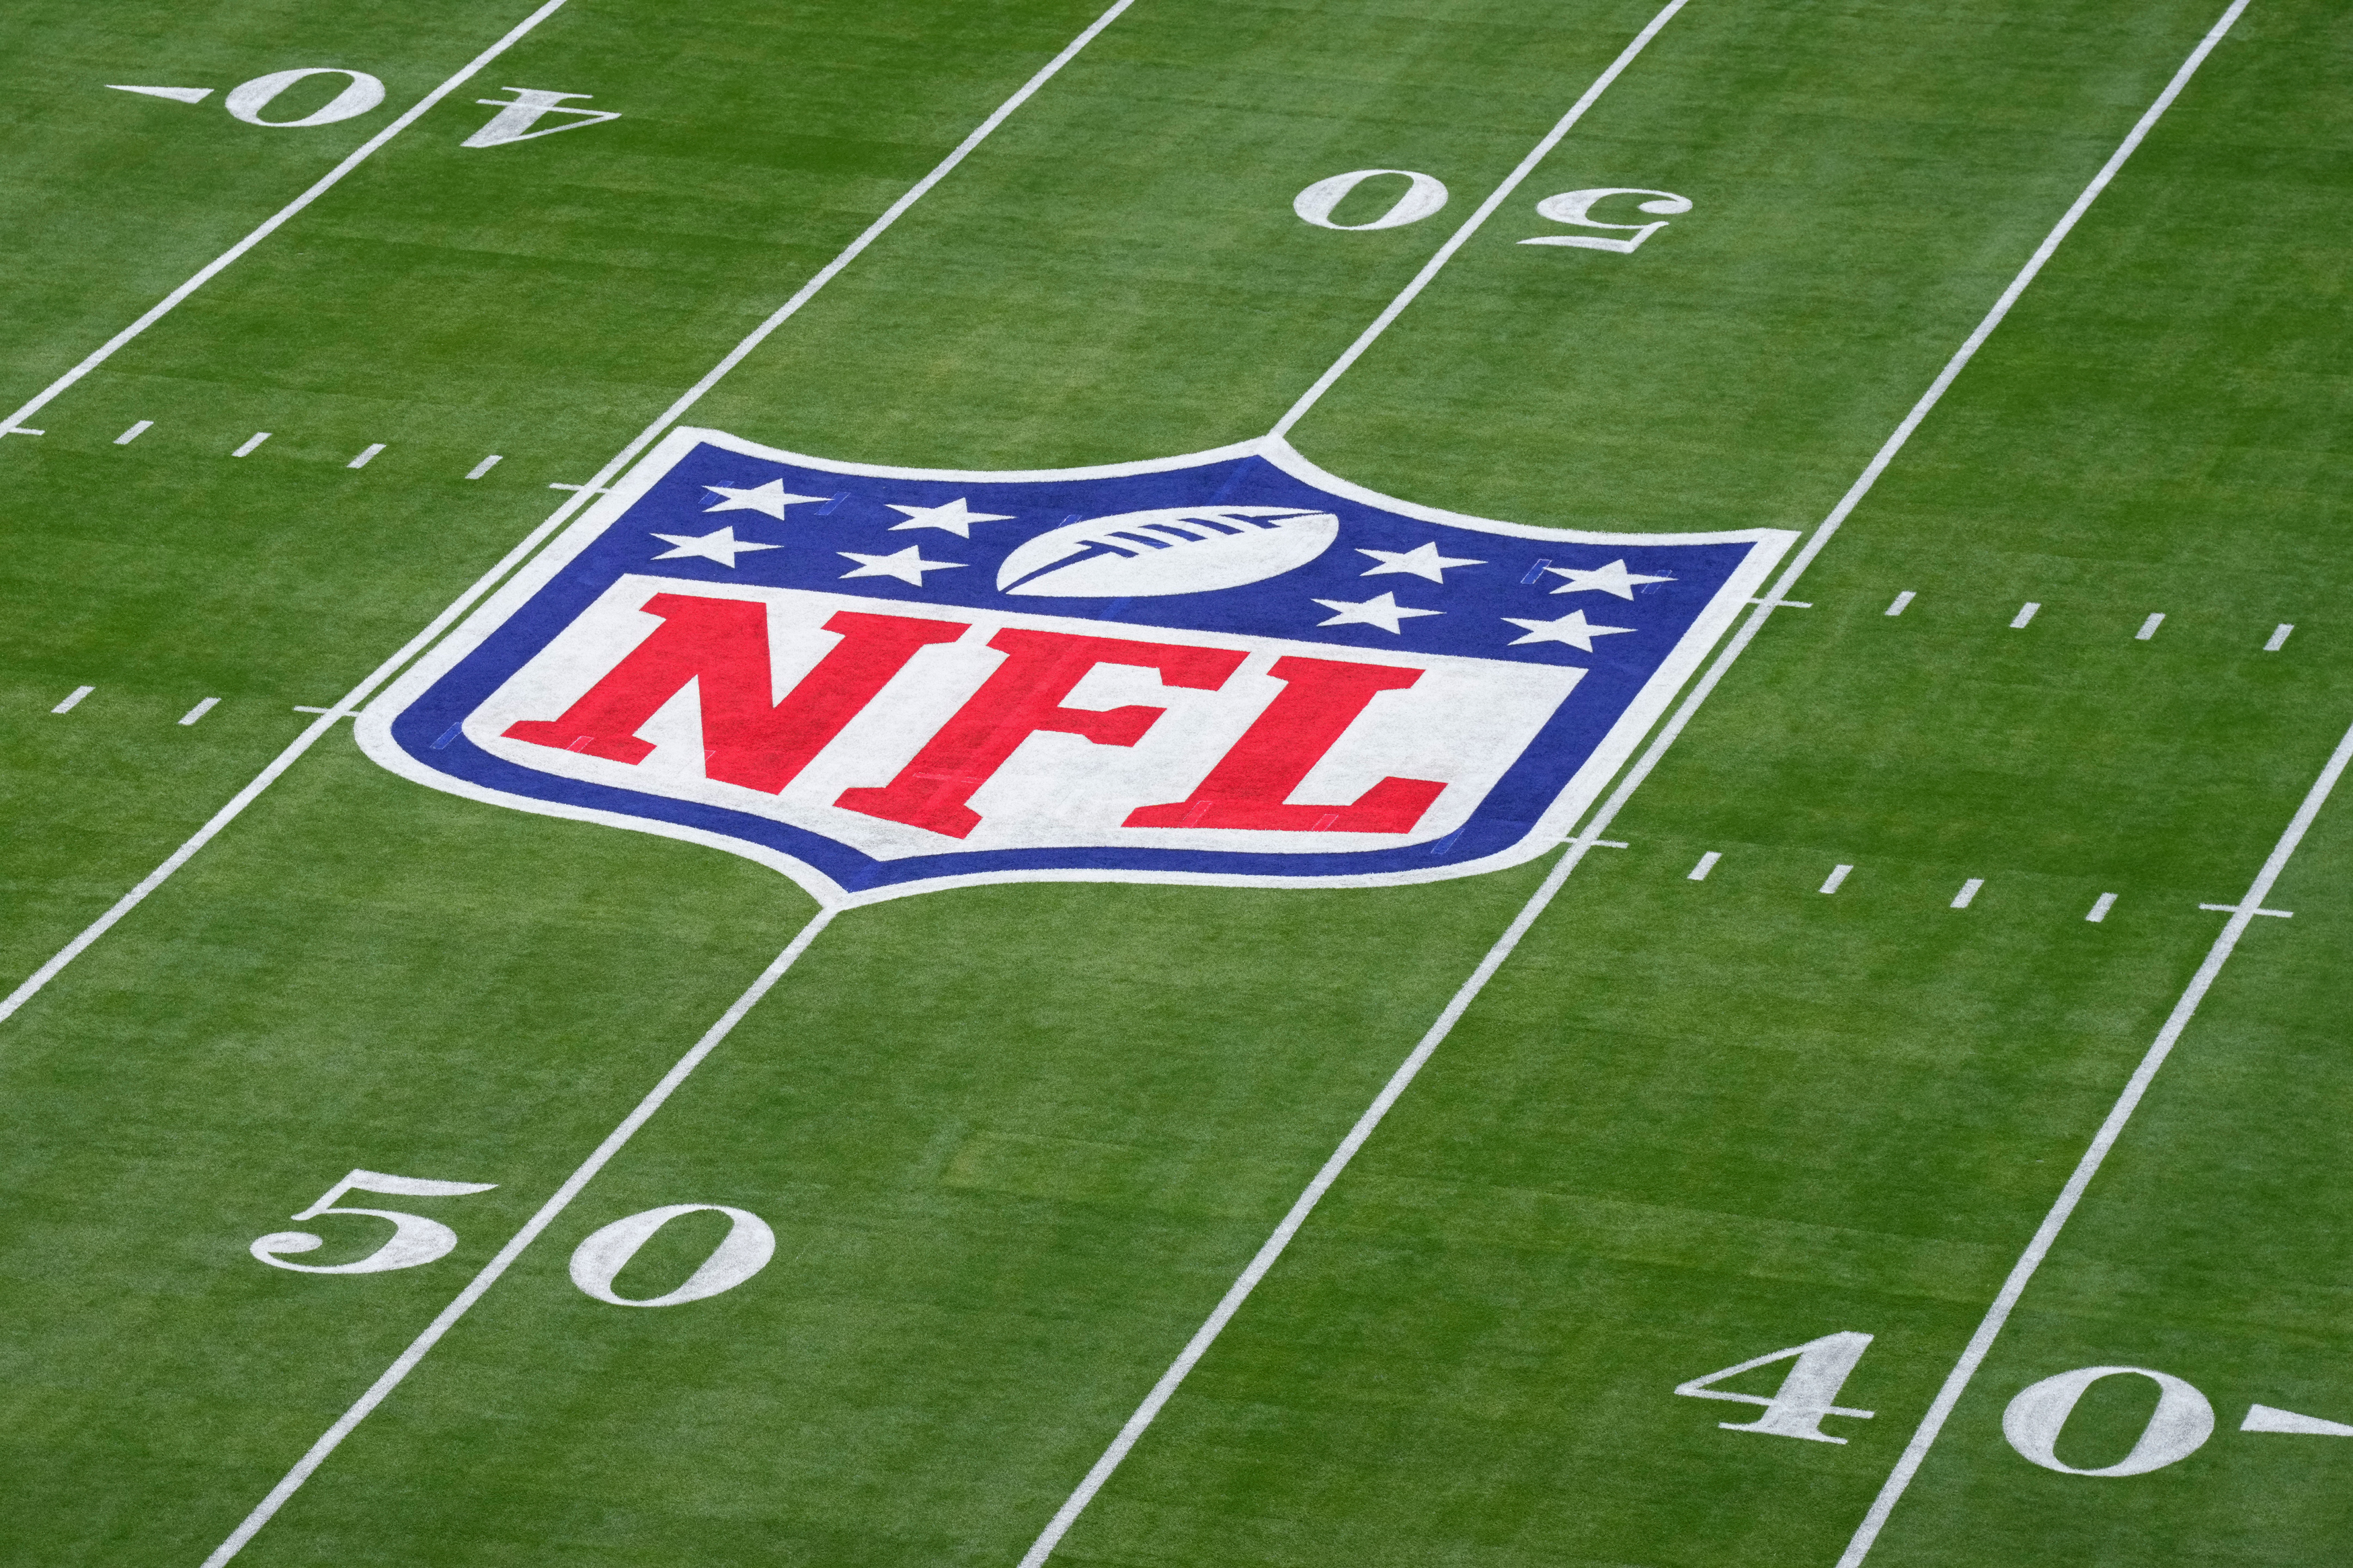 NFL practice squad, explained: Rules, pay, roster limit, and more